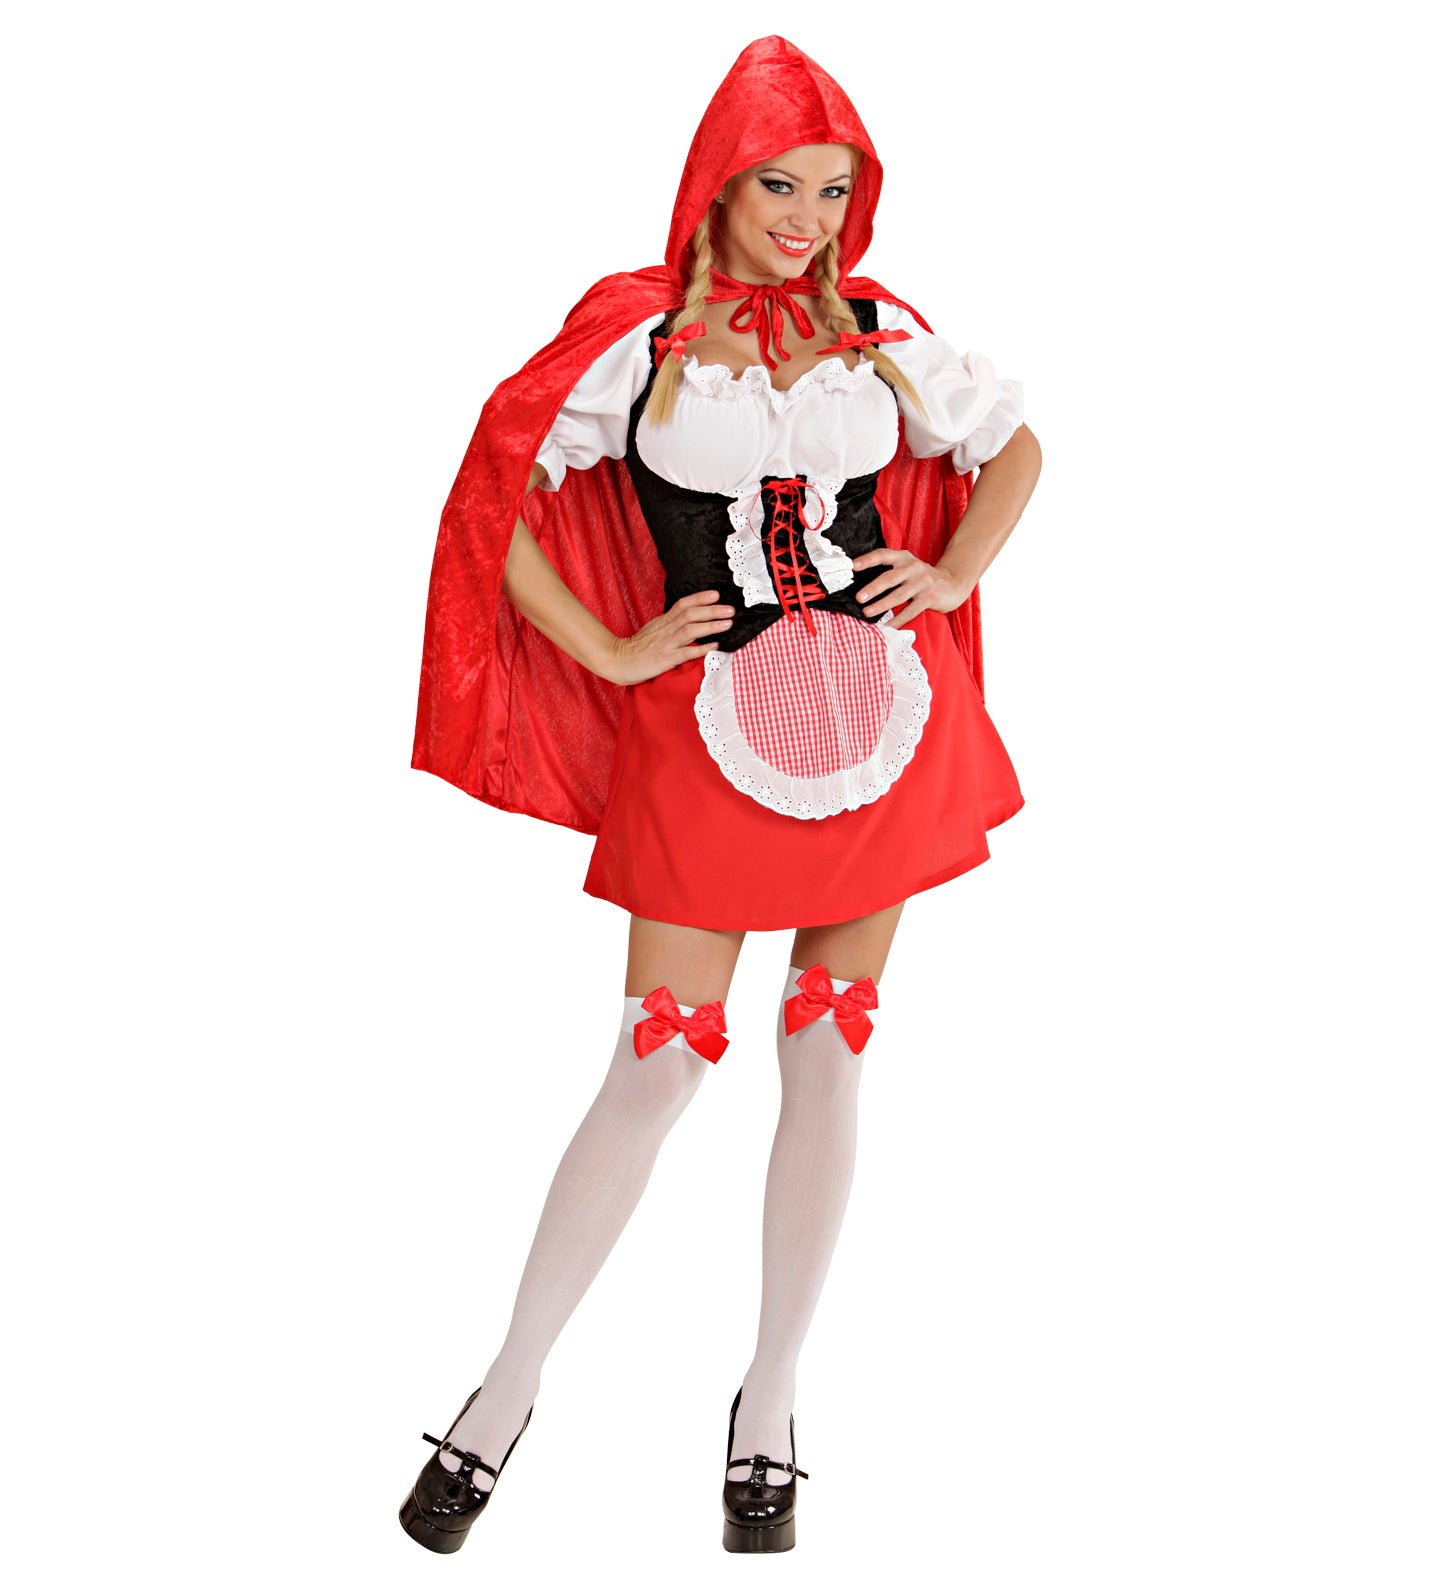 Red Riding Hood Capelet Costume